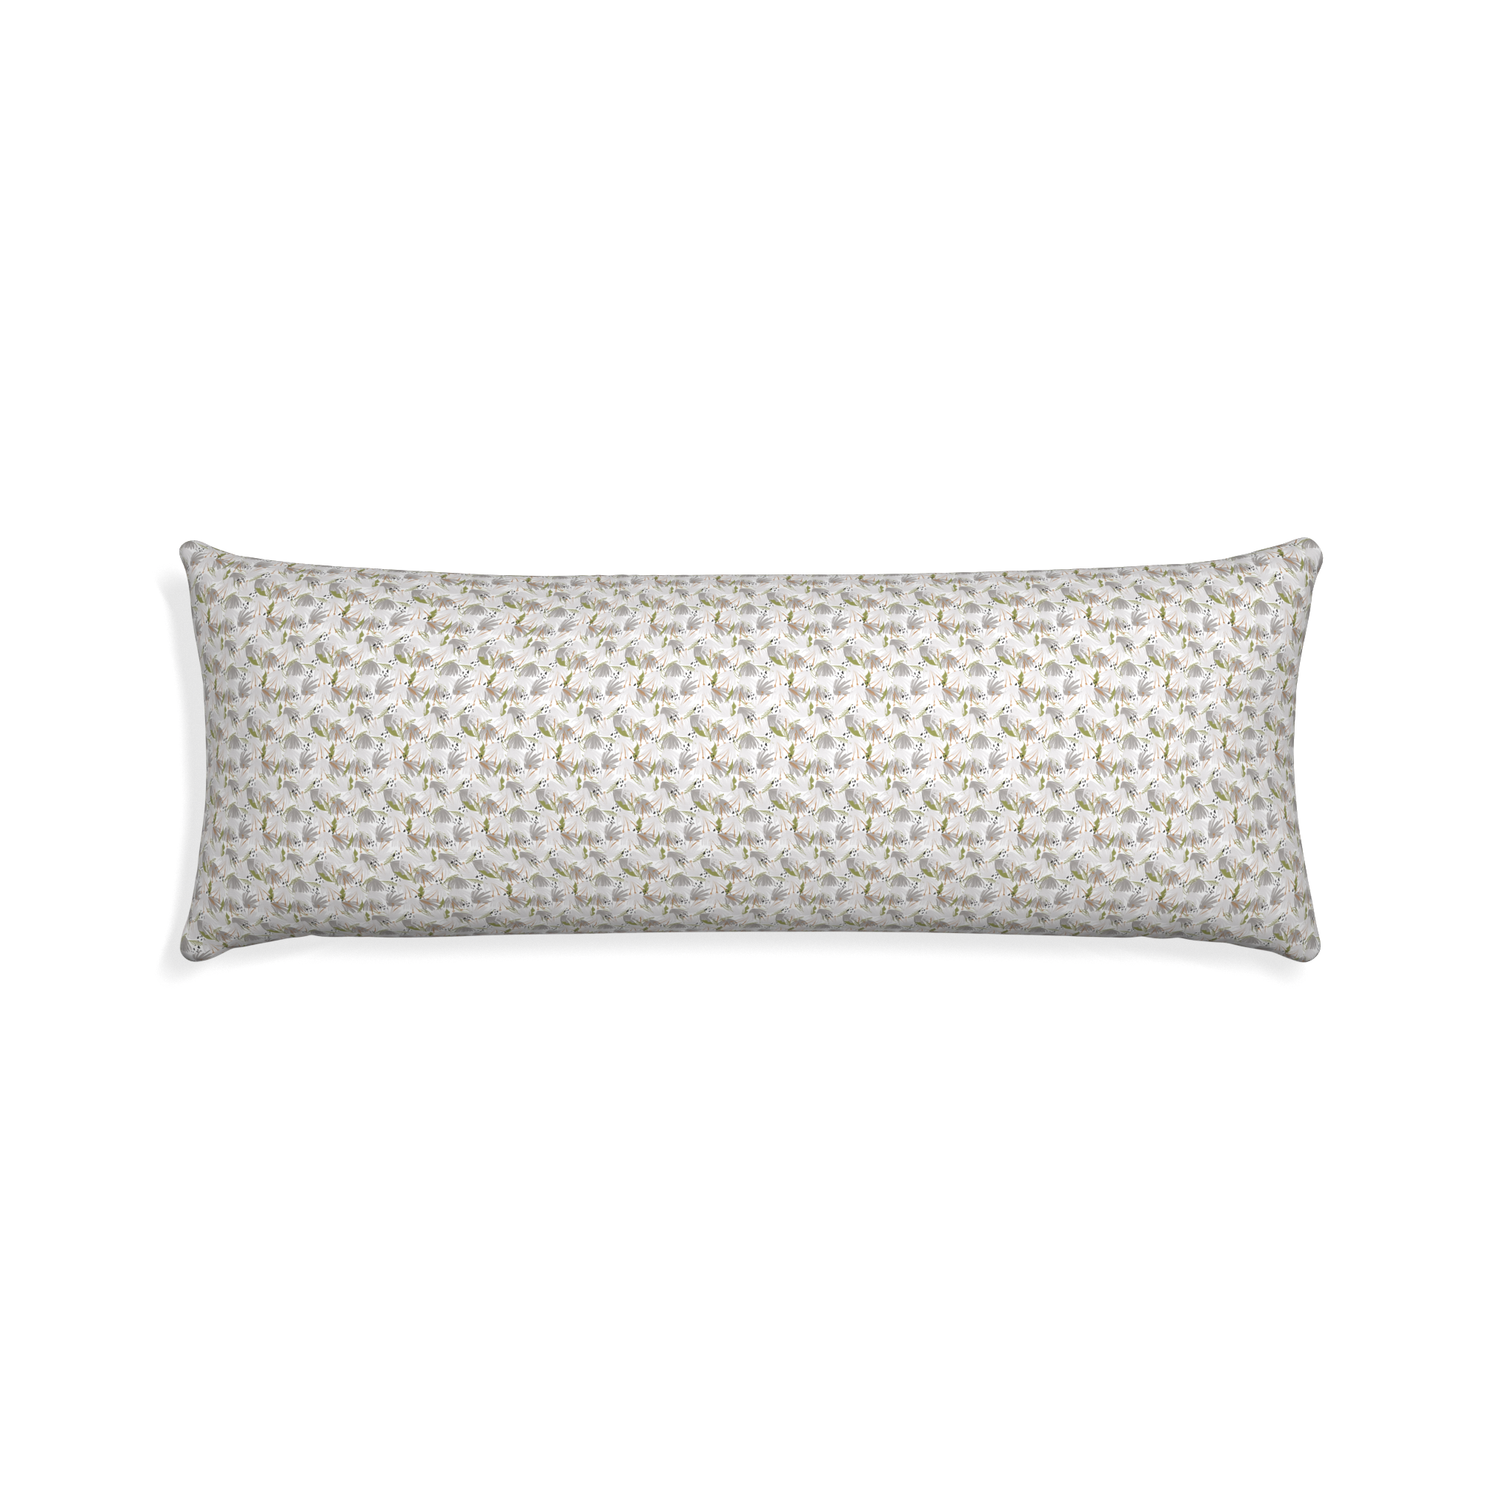 Xl-lumbar eden grey custom pillow with none on white background